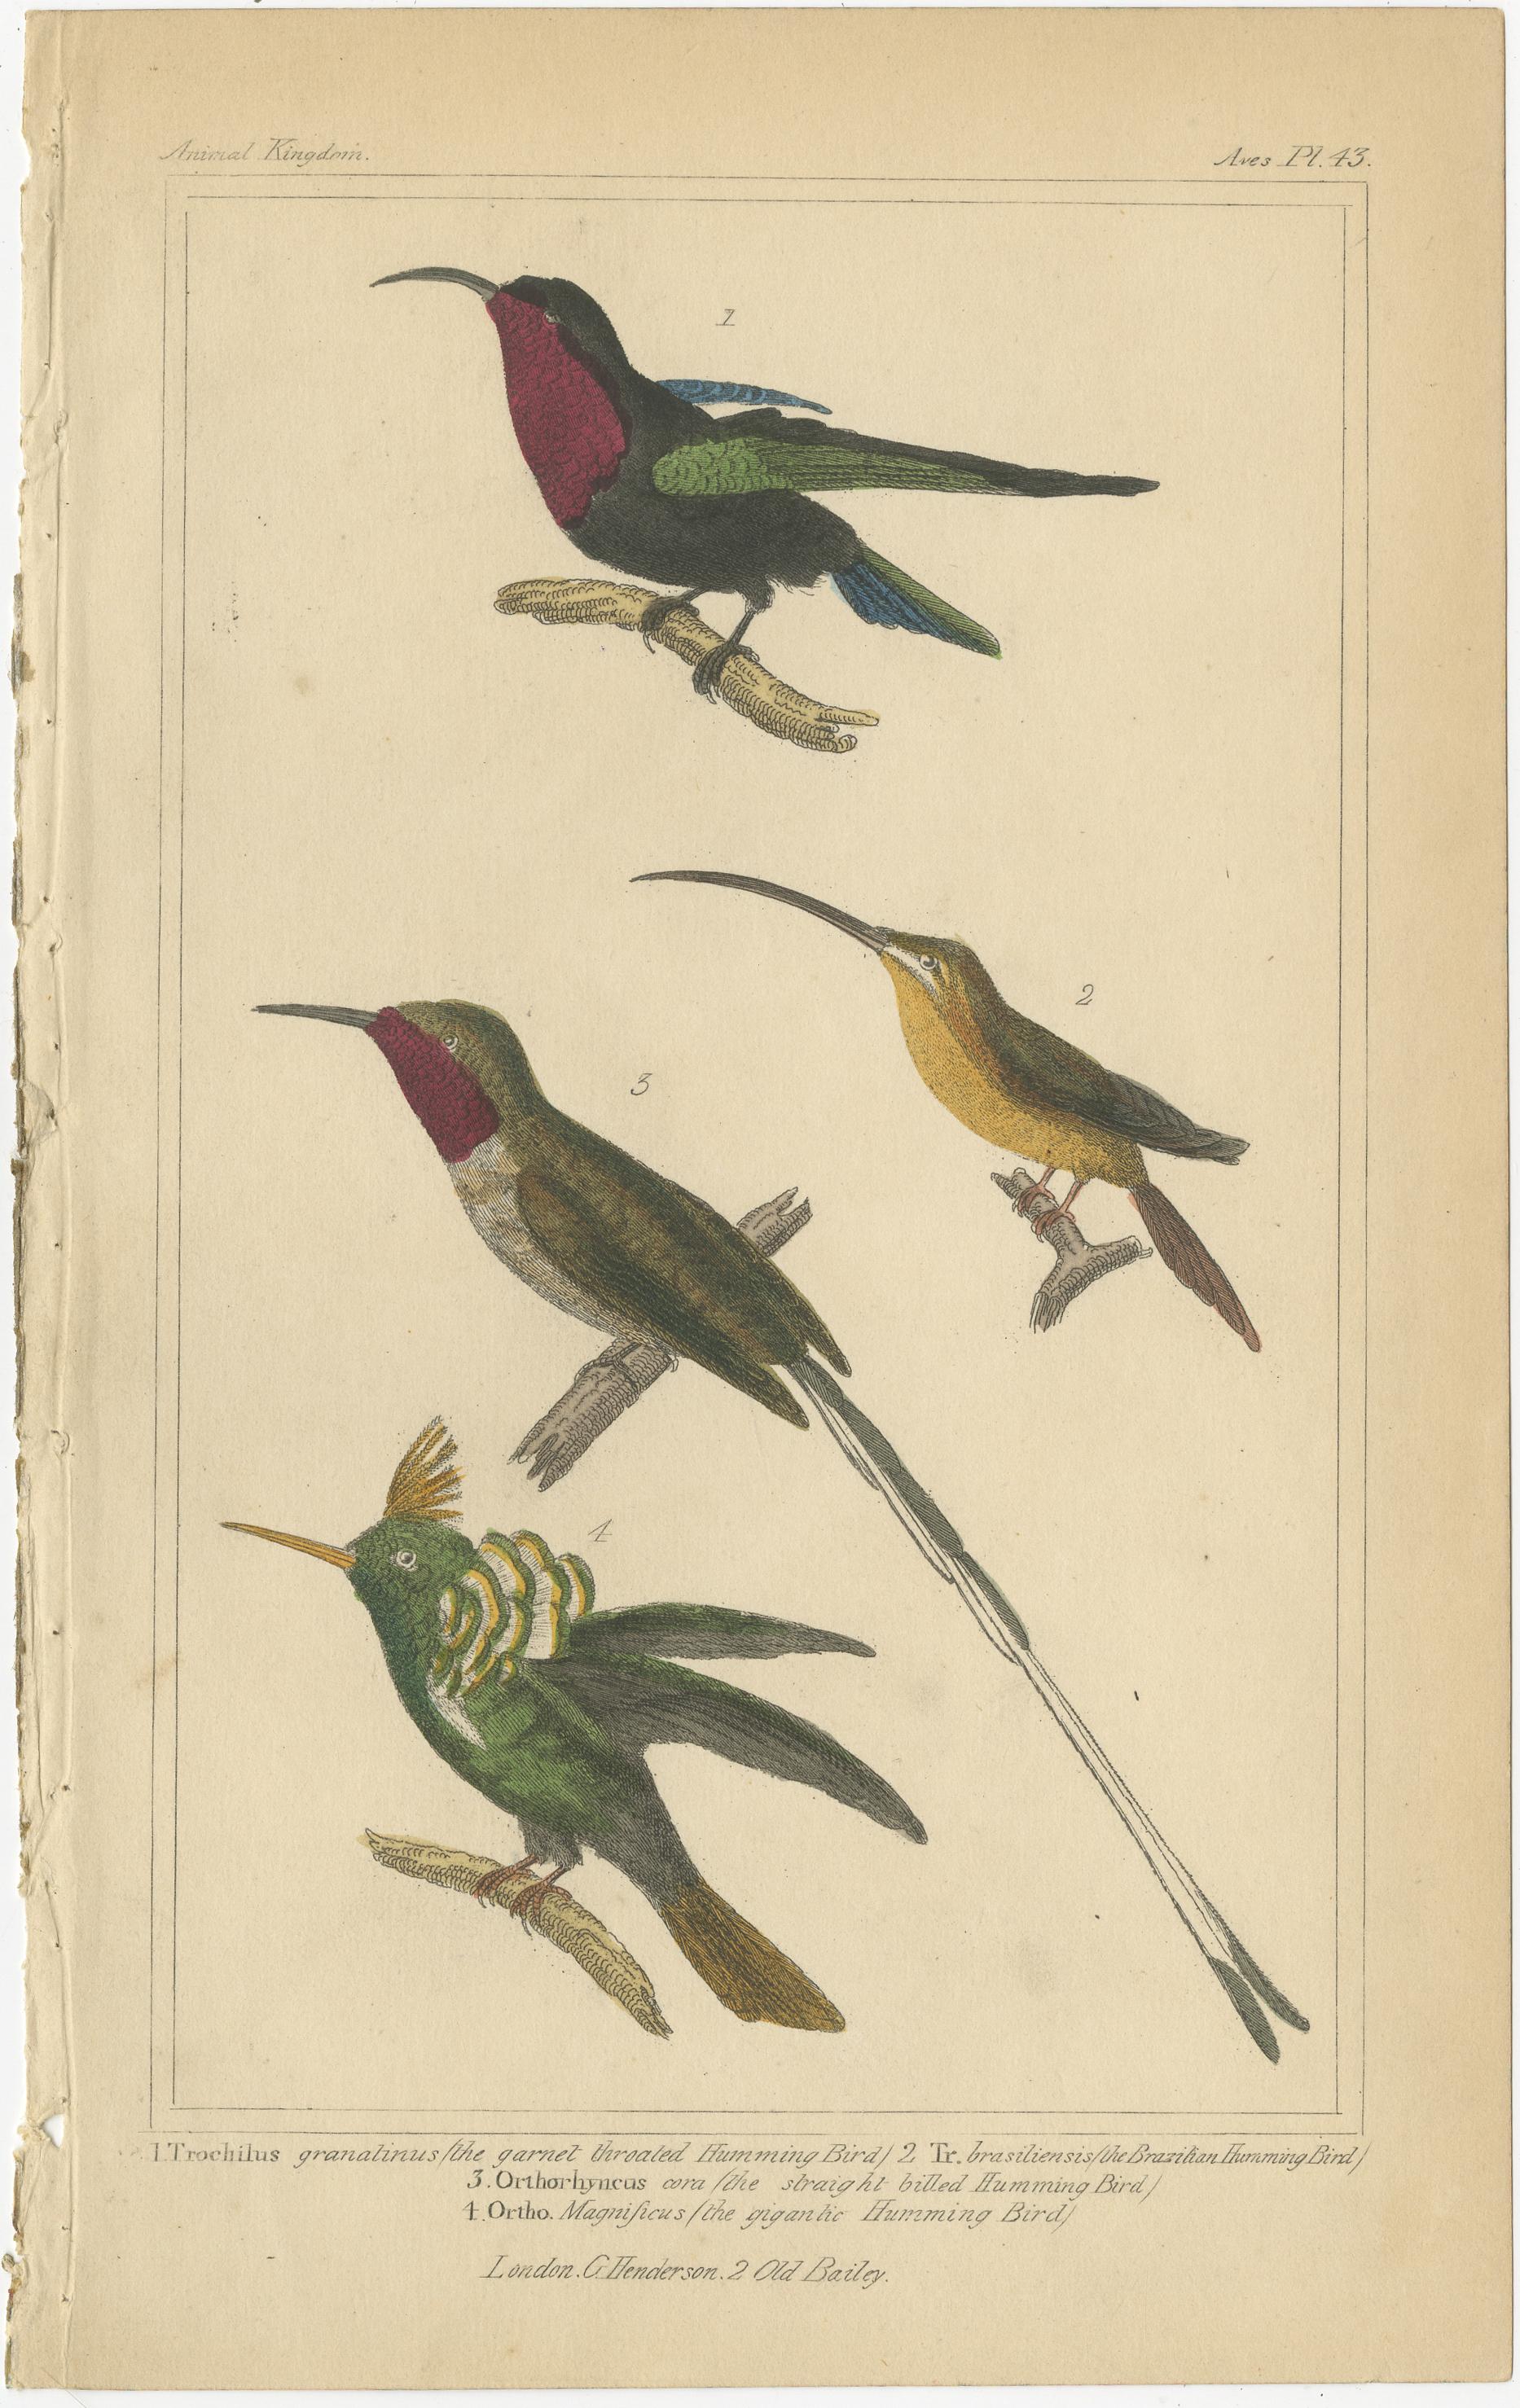 Set of four antique bird prints including illustrations of the horned parrakeet, the scarlet macaw, cockatoo, bird of paradise, hummingbird and others. These prints originate from the 'Animal Kingdom' by Cuvier. Published 1834.